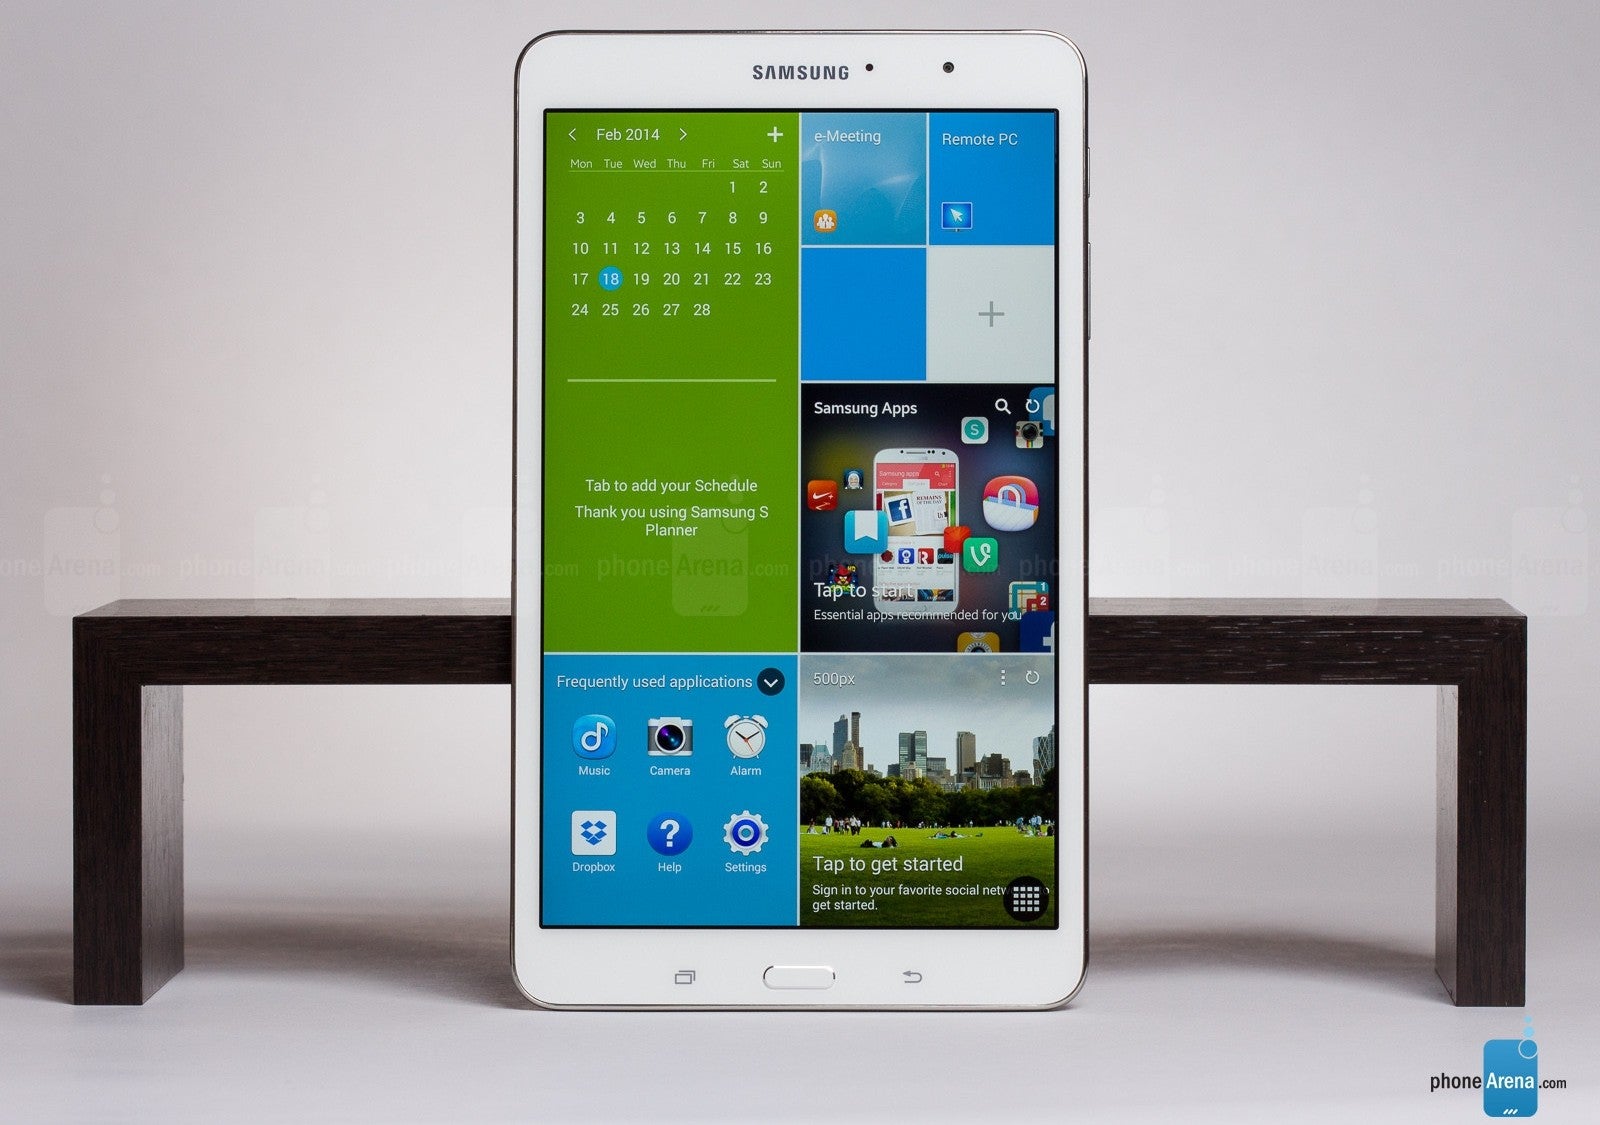 Deal alert: Samsung Galaxy Tab Pro 8.4 and Pro 10.1 now cost $329 and $399, respectively